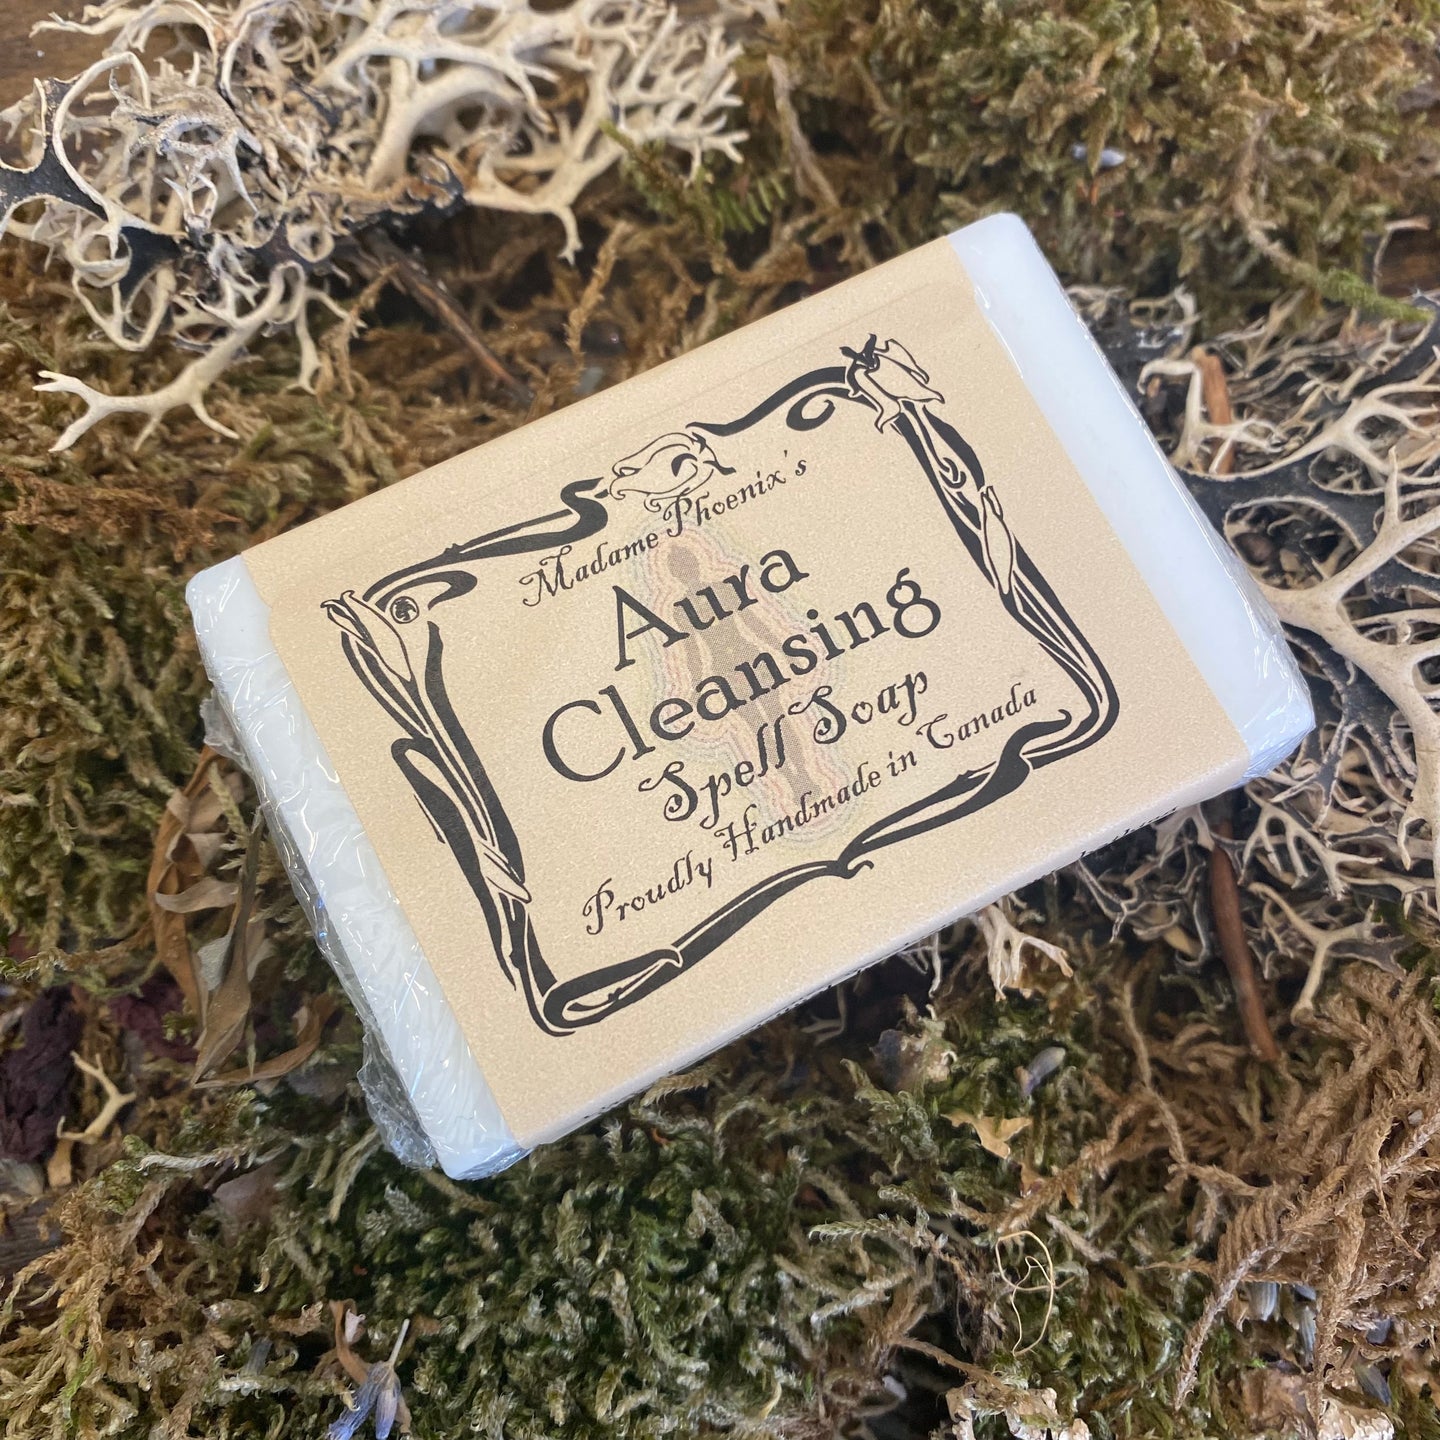 Aura Cleansing Spell Soap